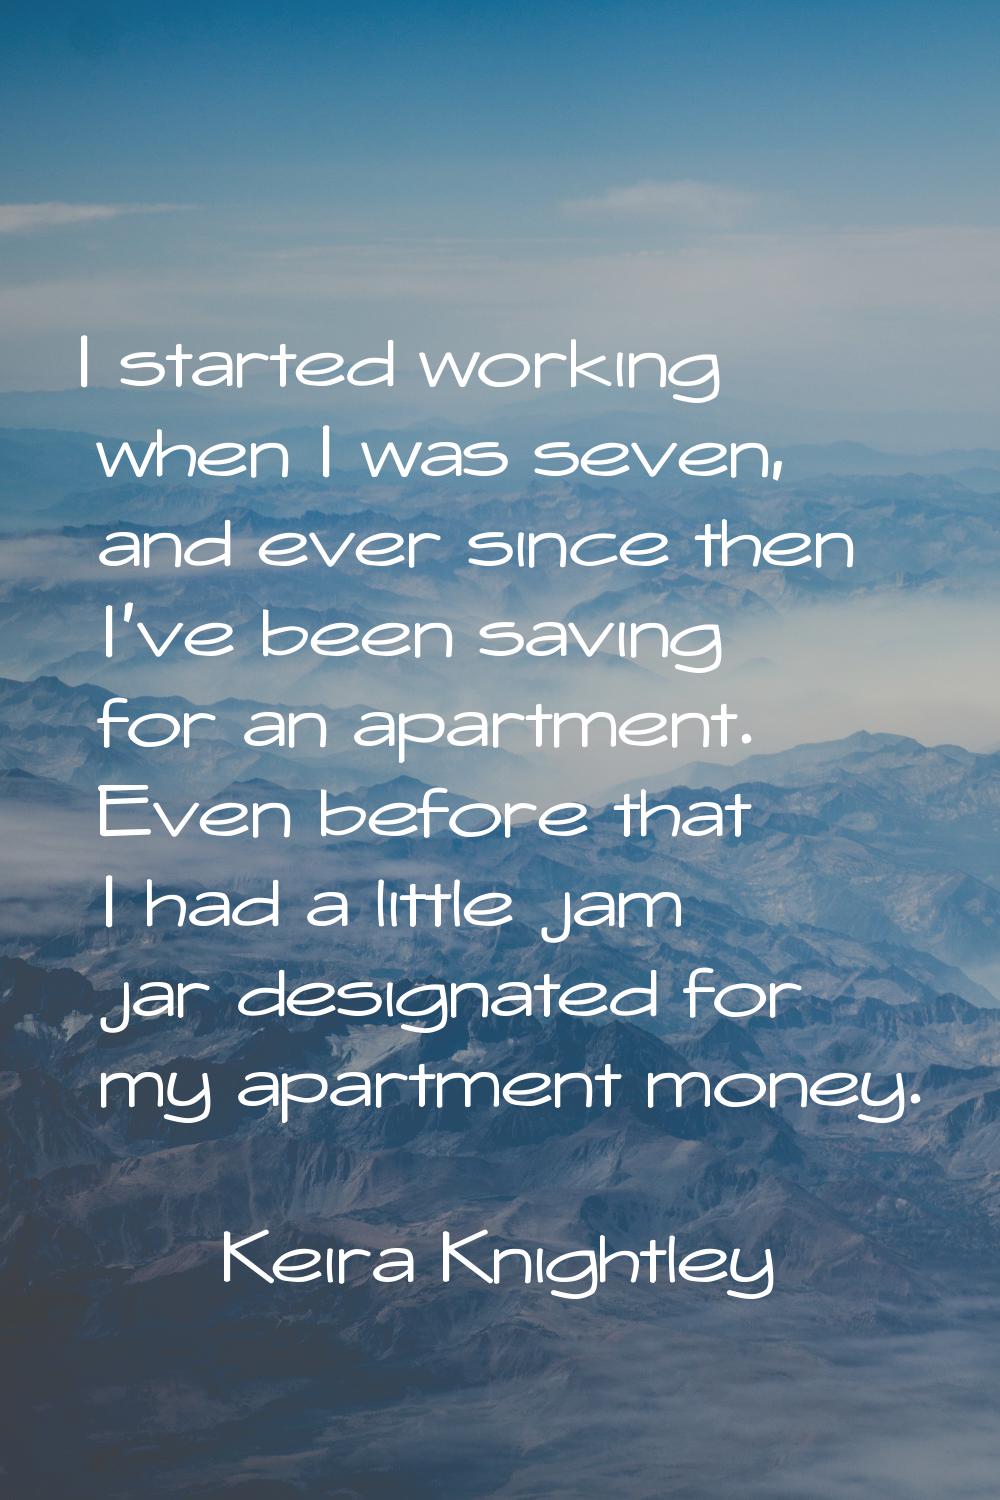 I started working when I was seven, and ever since then I've been saving for an apartment. Even bef